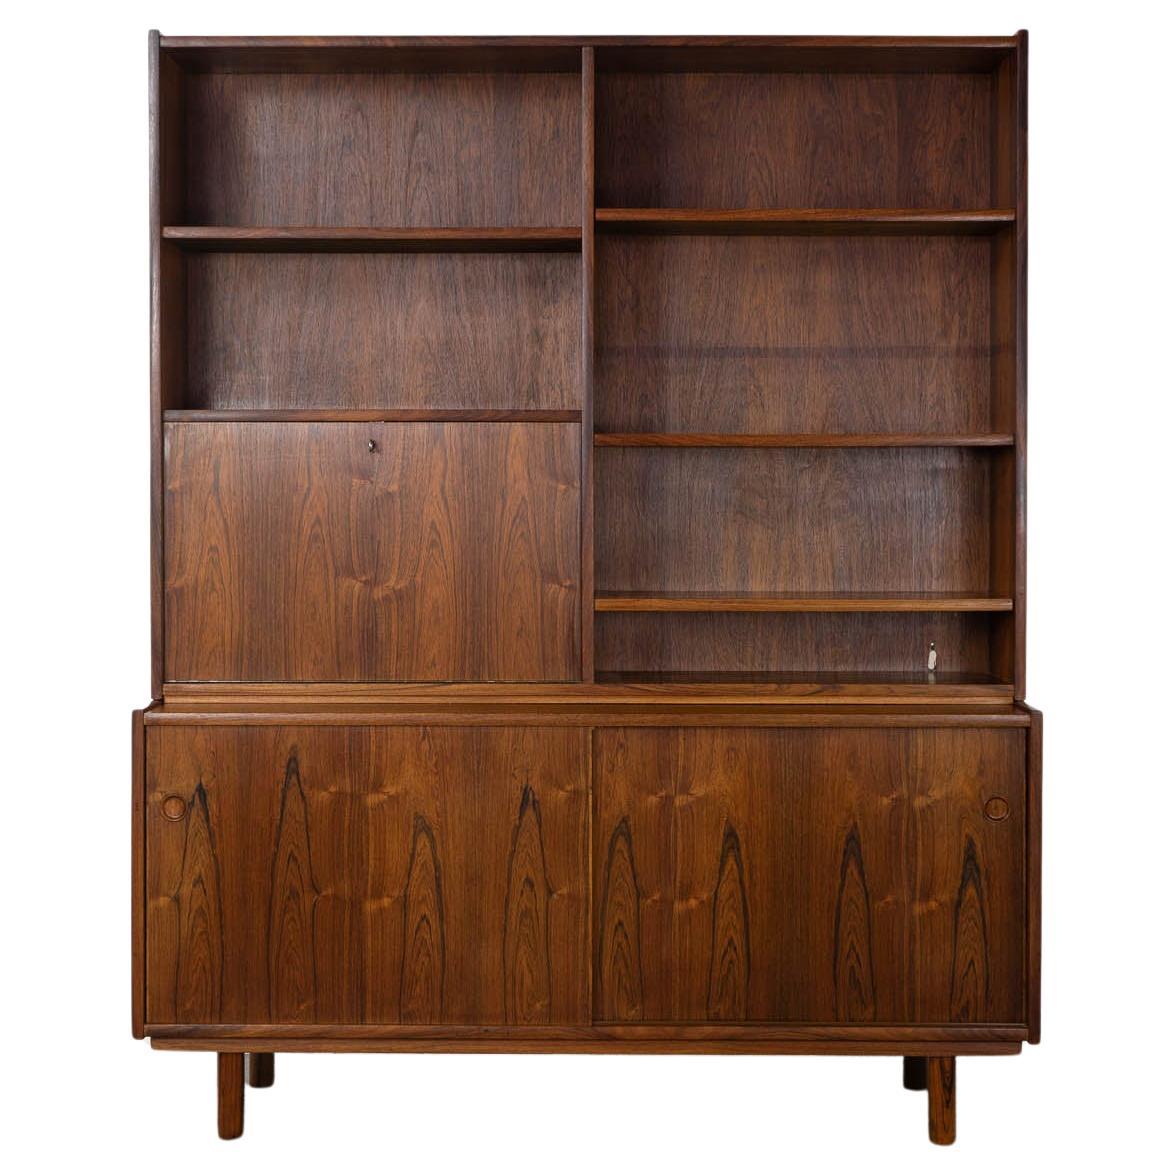 Danish Modern Rosewood Bookcase Cabinet with Desk